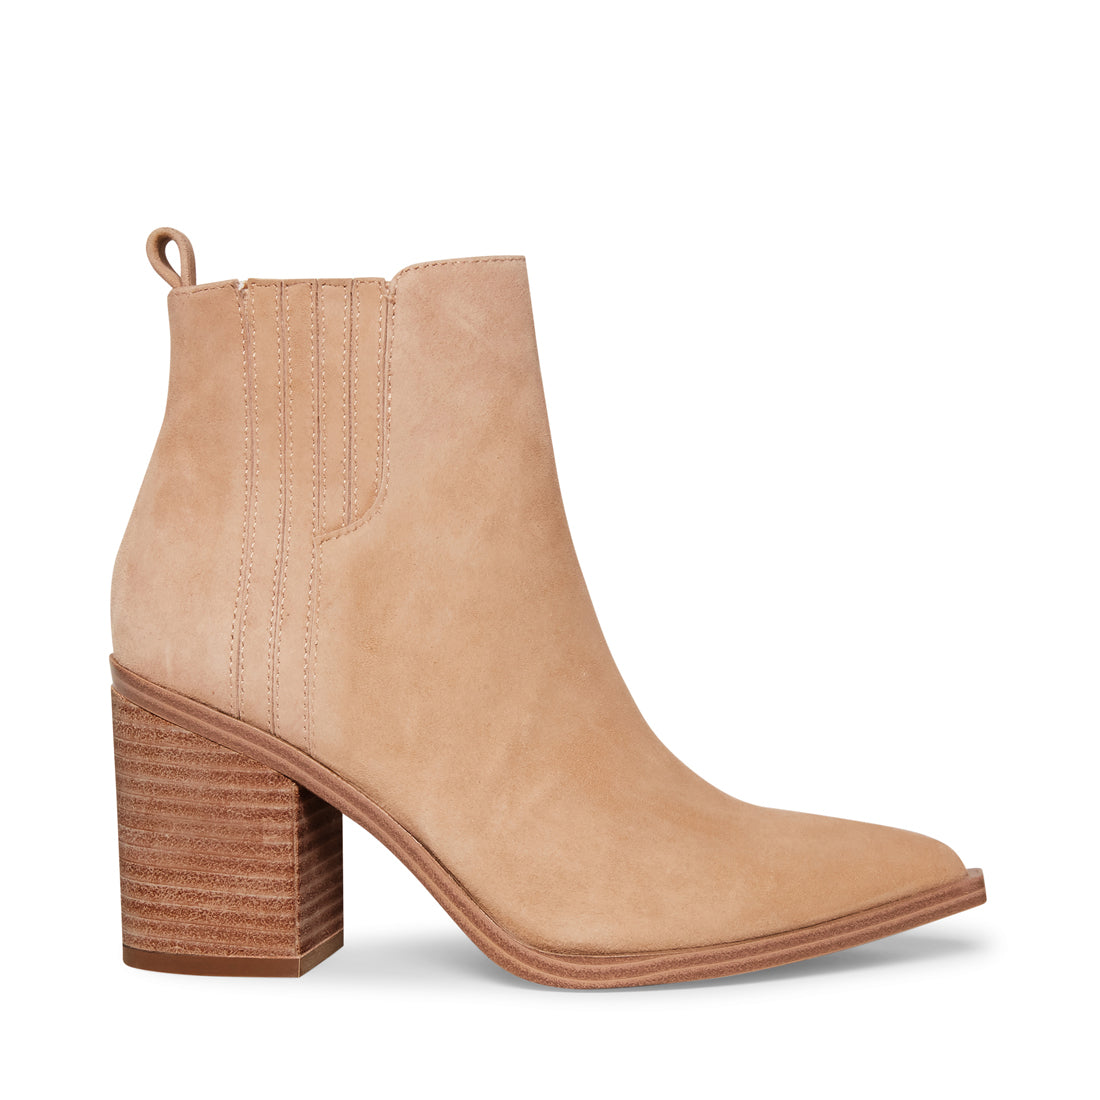 Ankle Booties | Steve Madden 